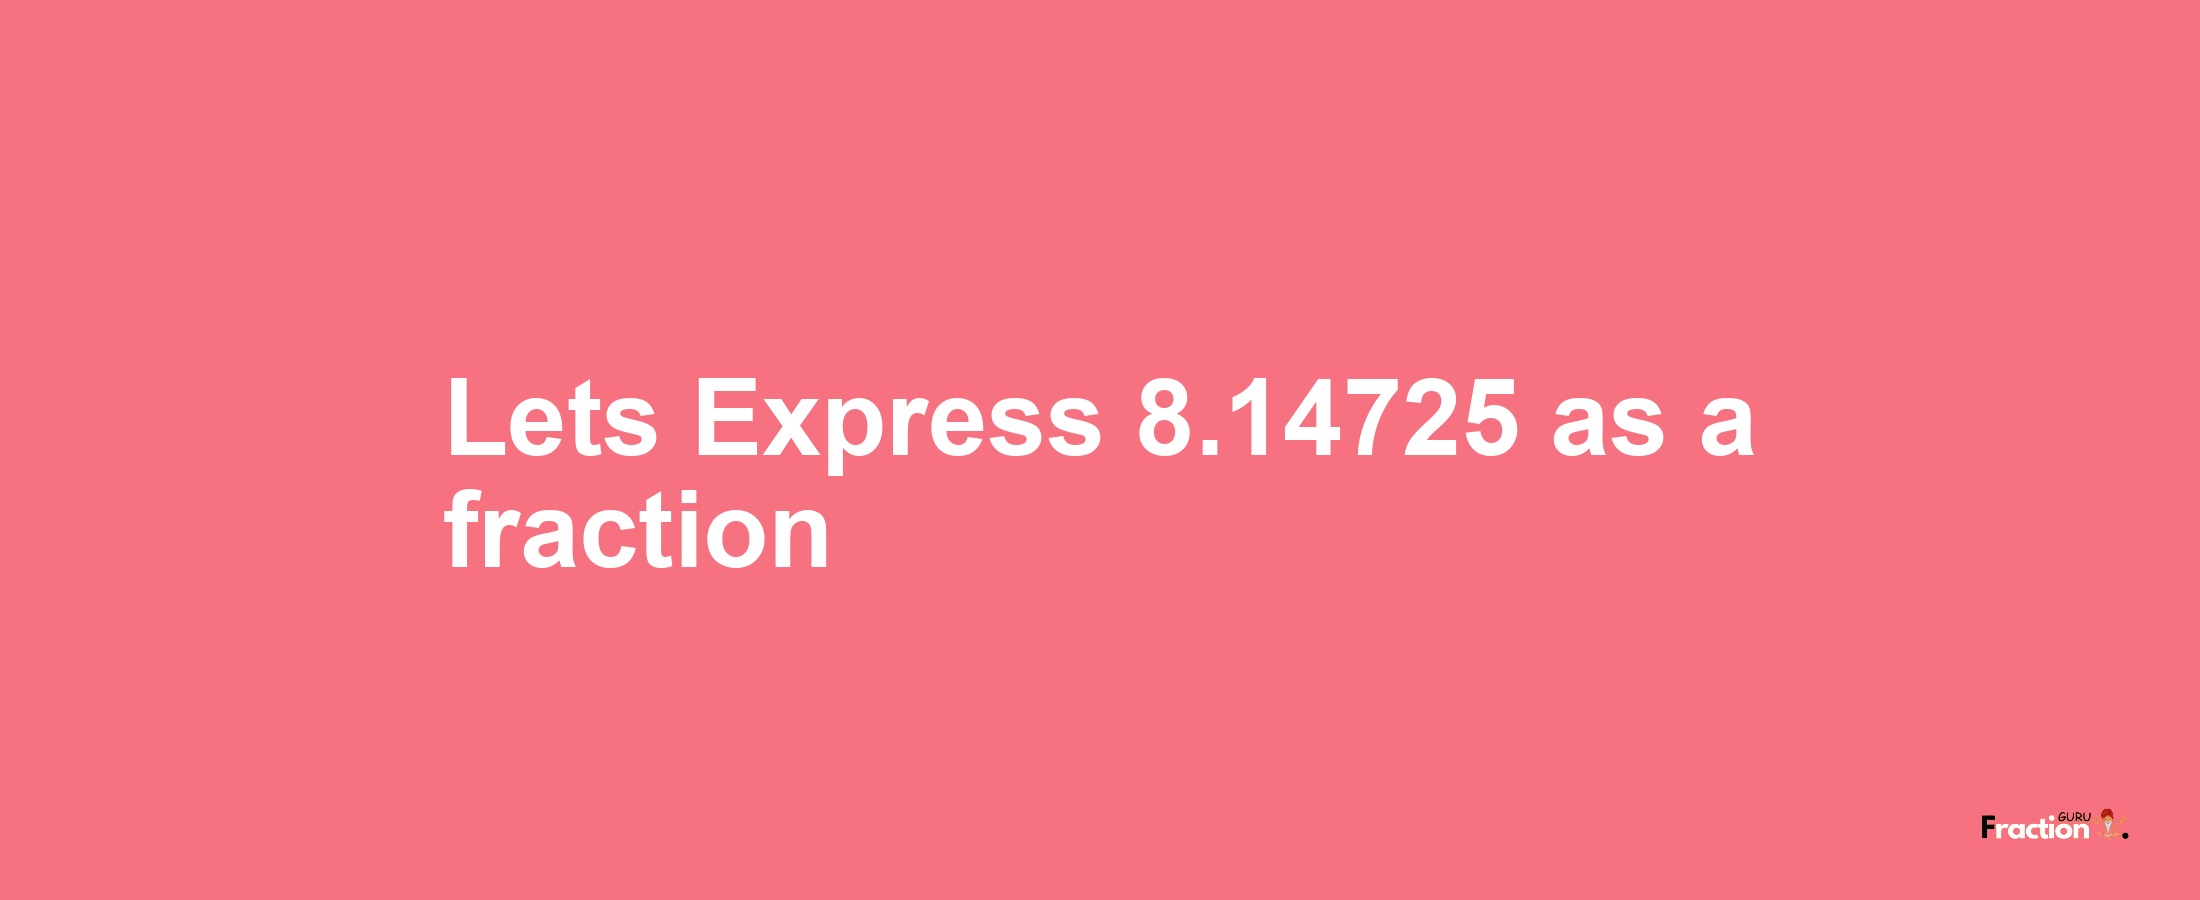 Lets Express 8.14725 as afraction